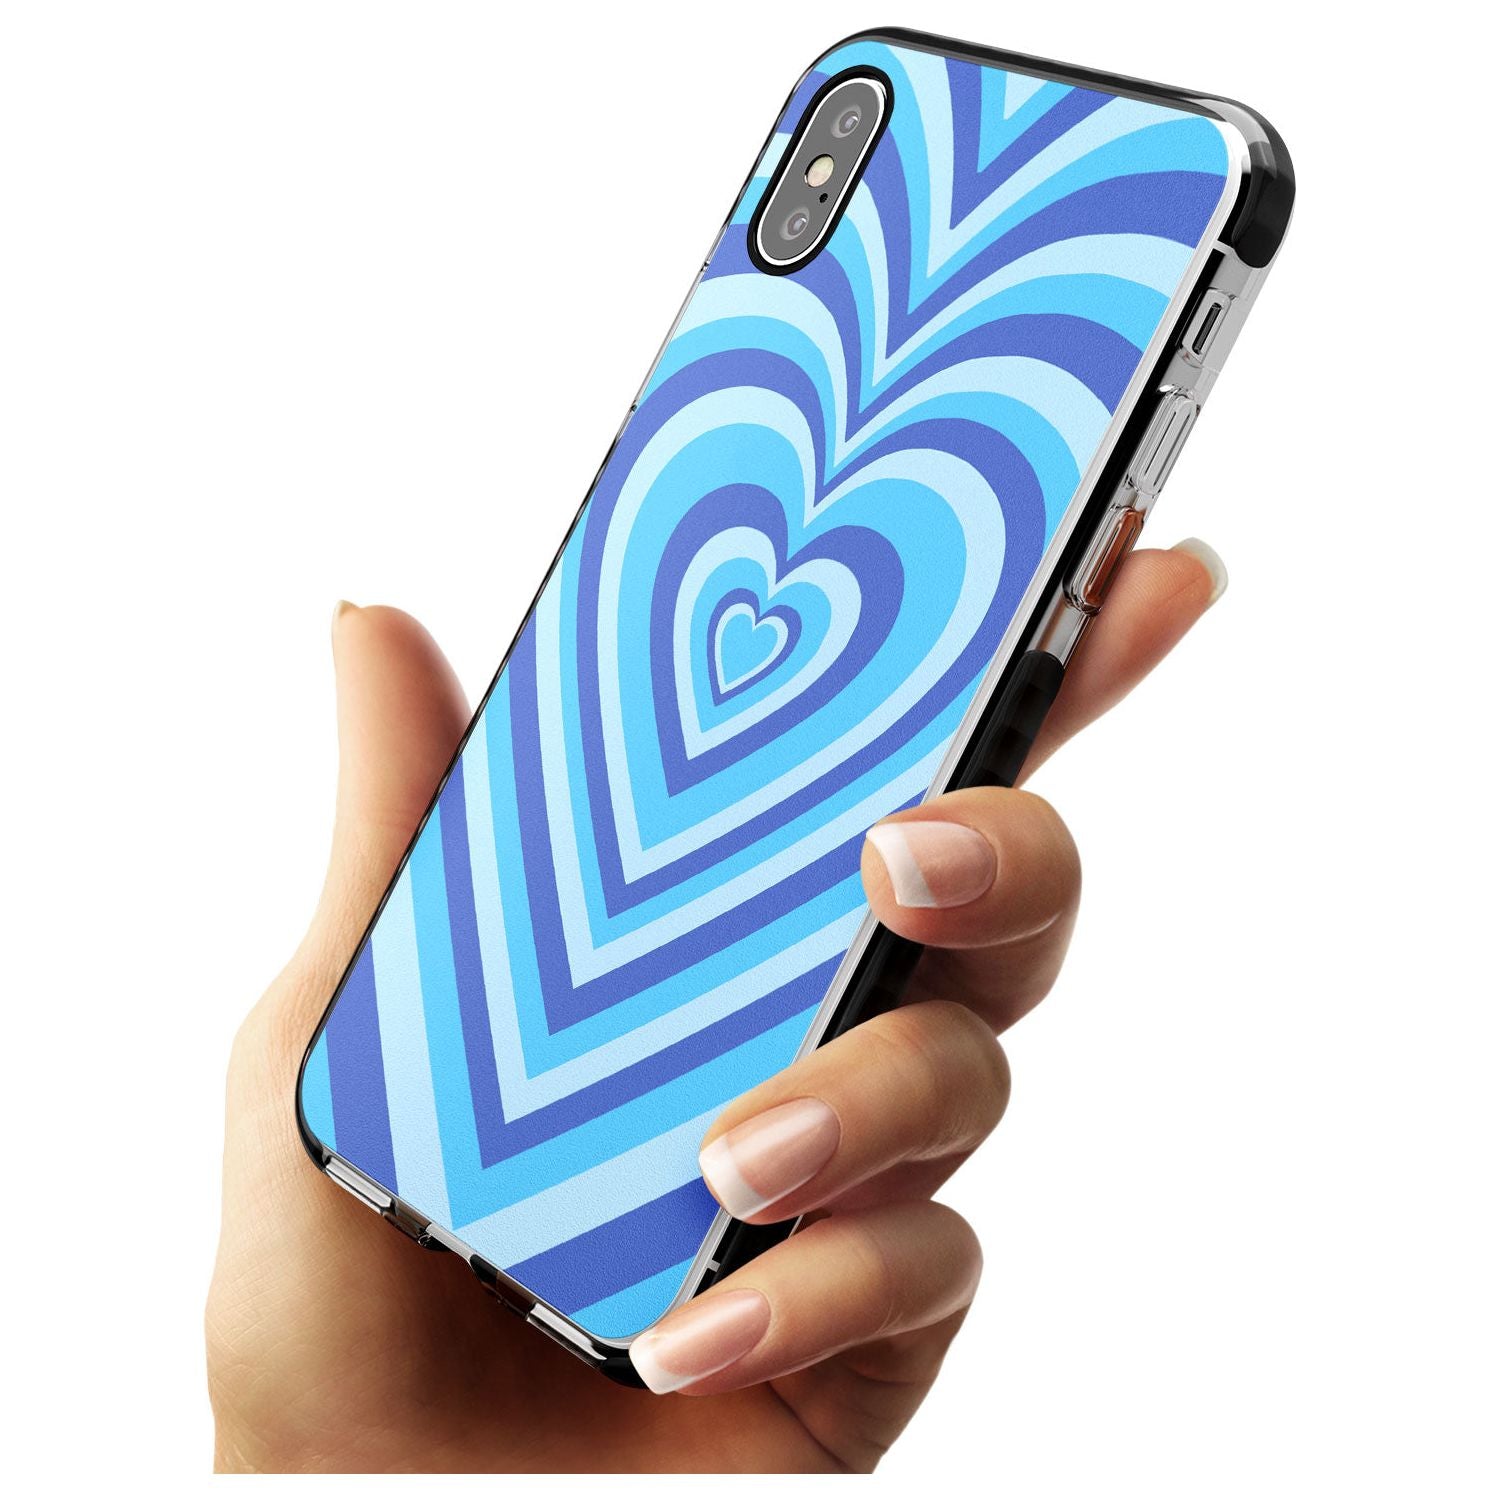 Blue Heart Illusion Black Impact Phone Case for iPhone X XS Max XR